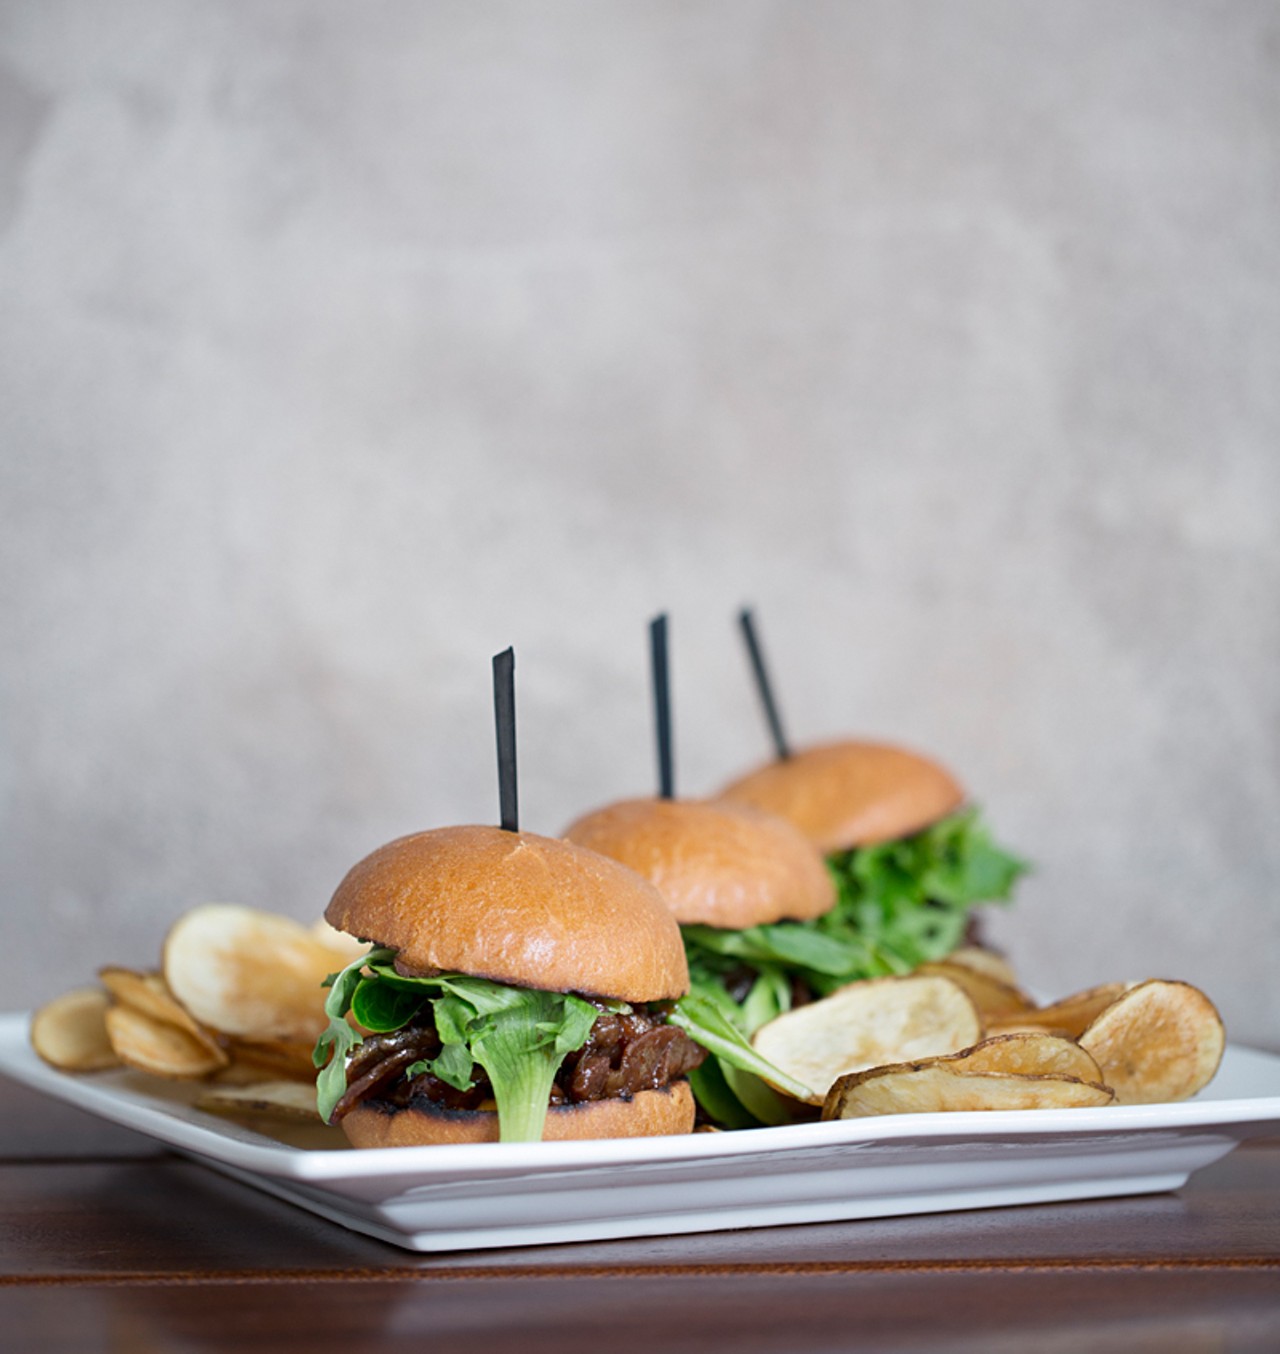 Bulgogi sliders are served on brioche buns with greens and a spicy mayo.